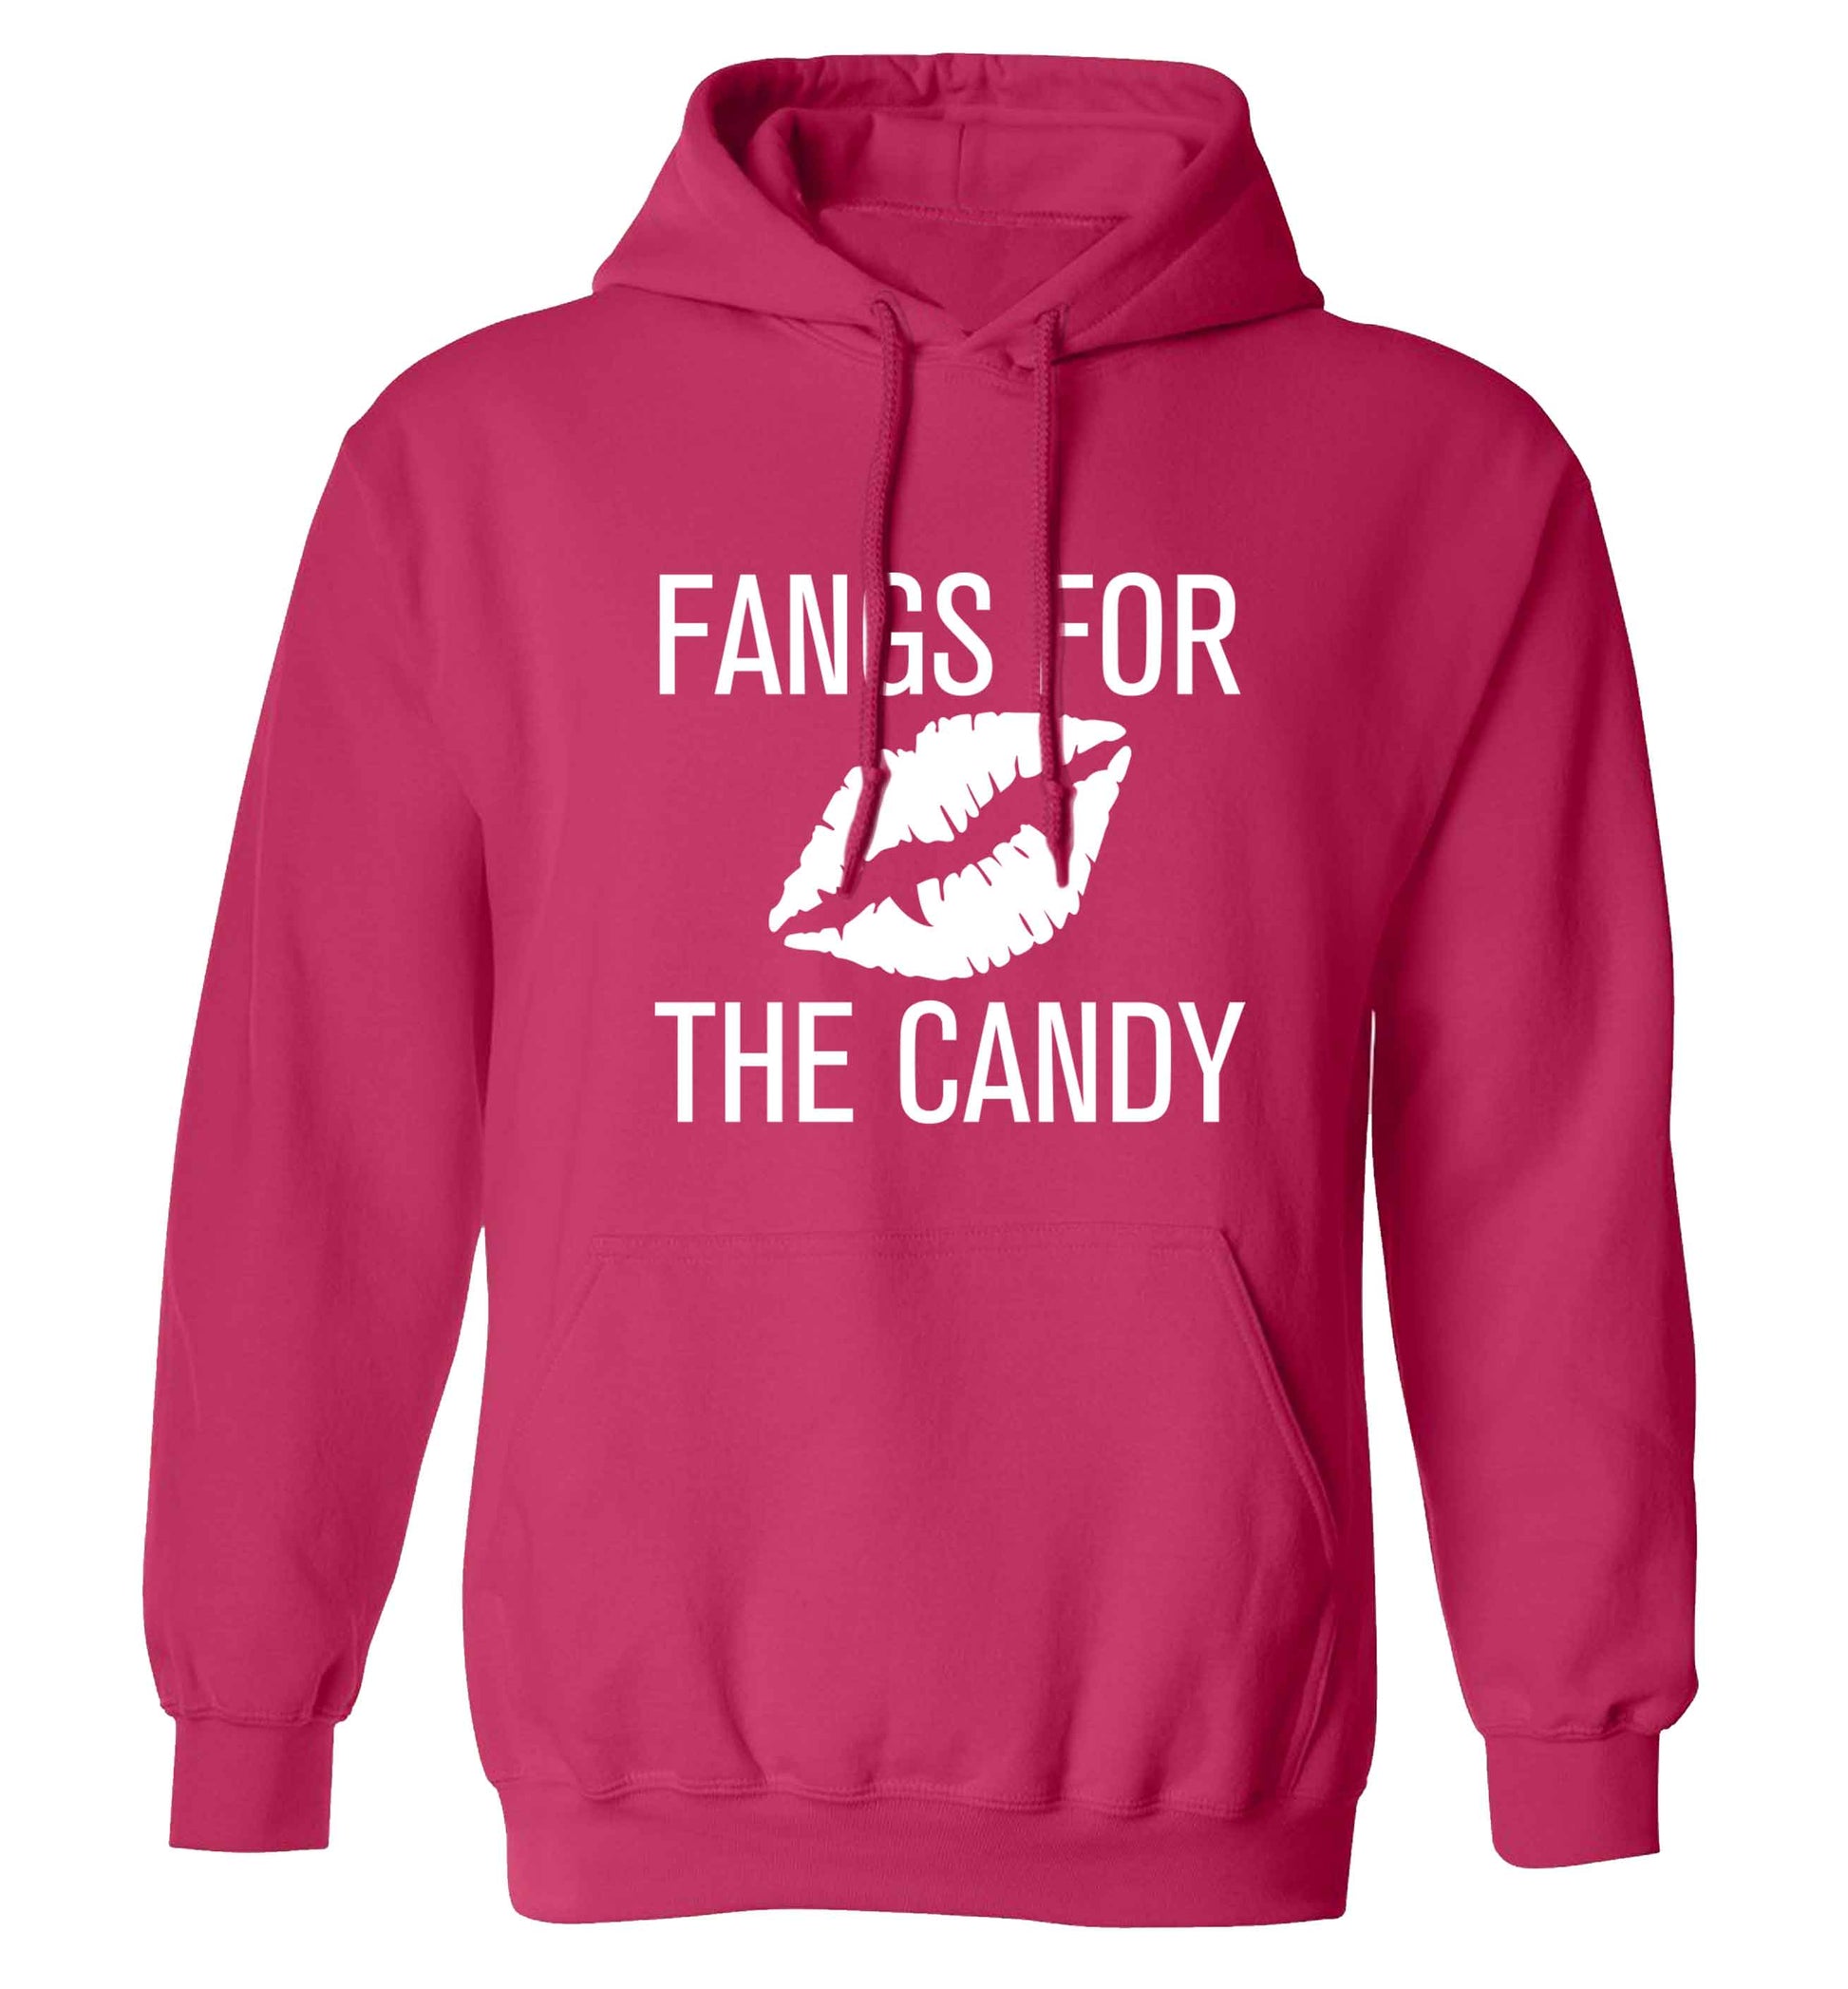 Fangs for the candy adults unisex pink hoodie 2XL